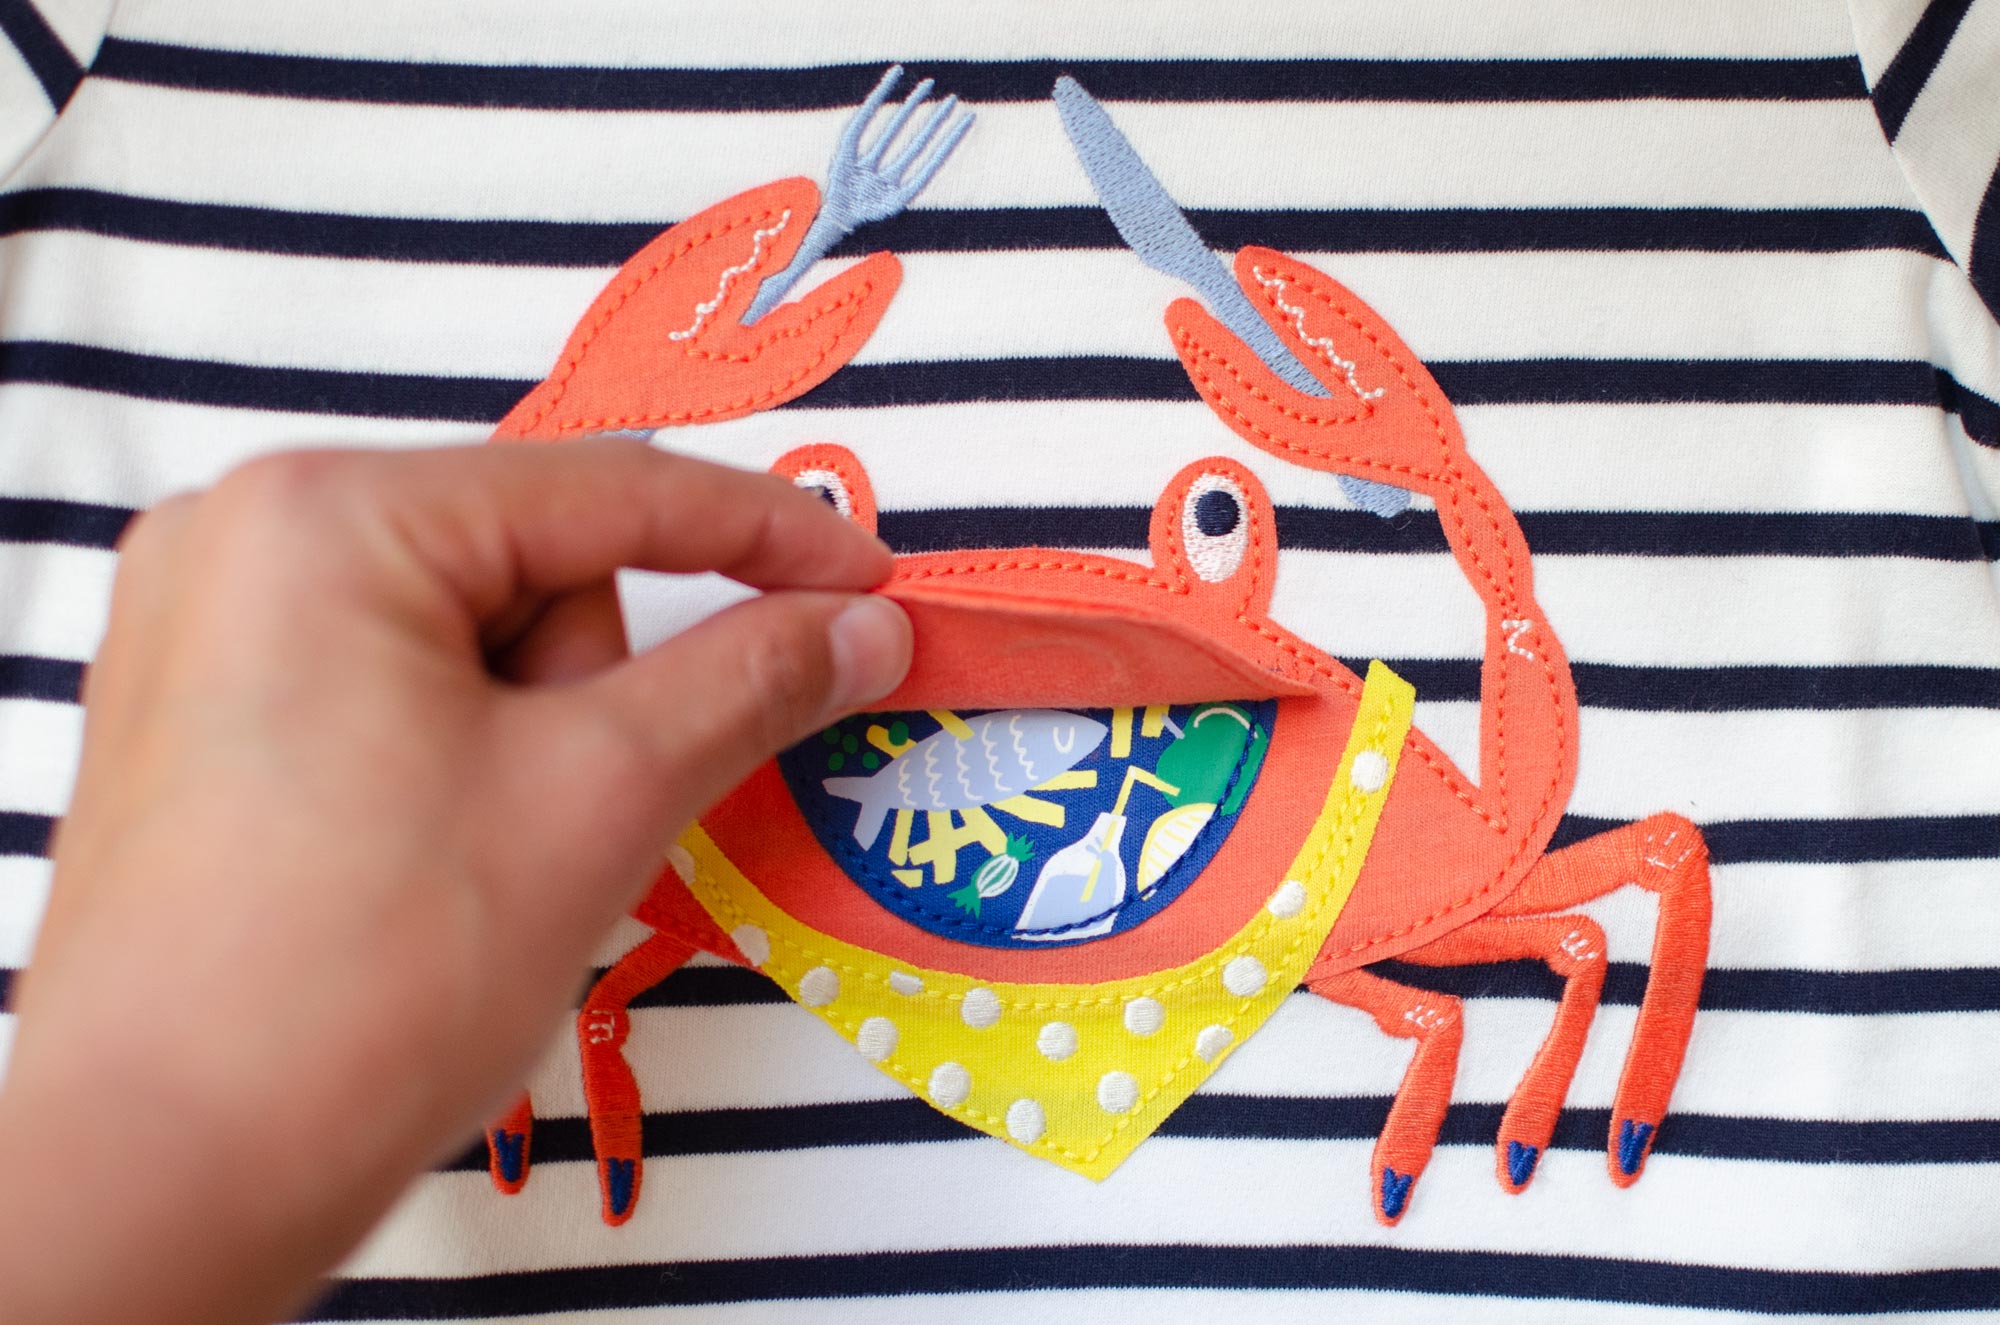 Crab chomp design by Elly Jahnz for Joules Clothing